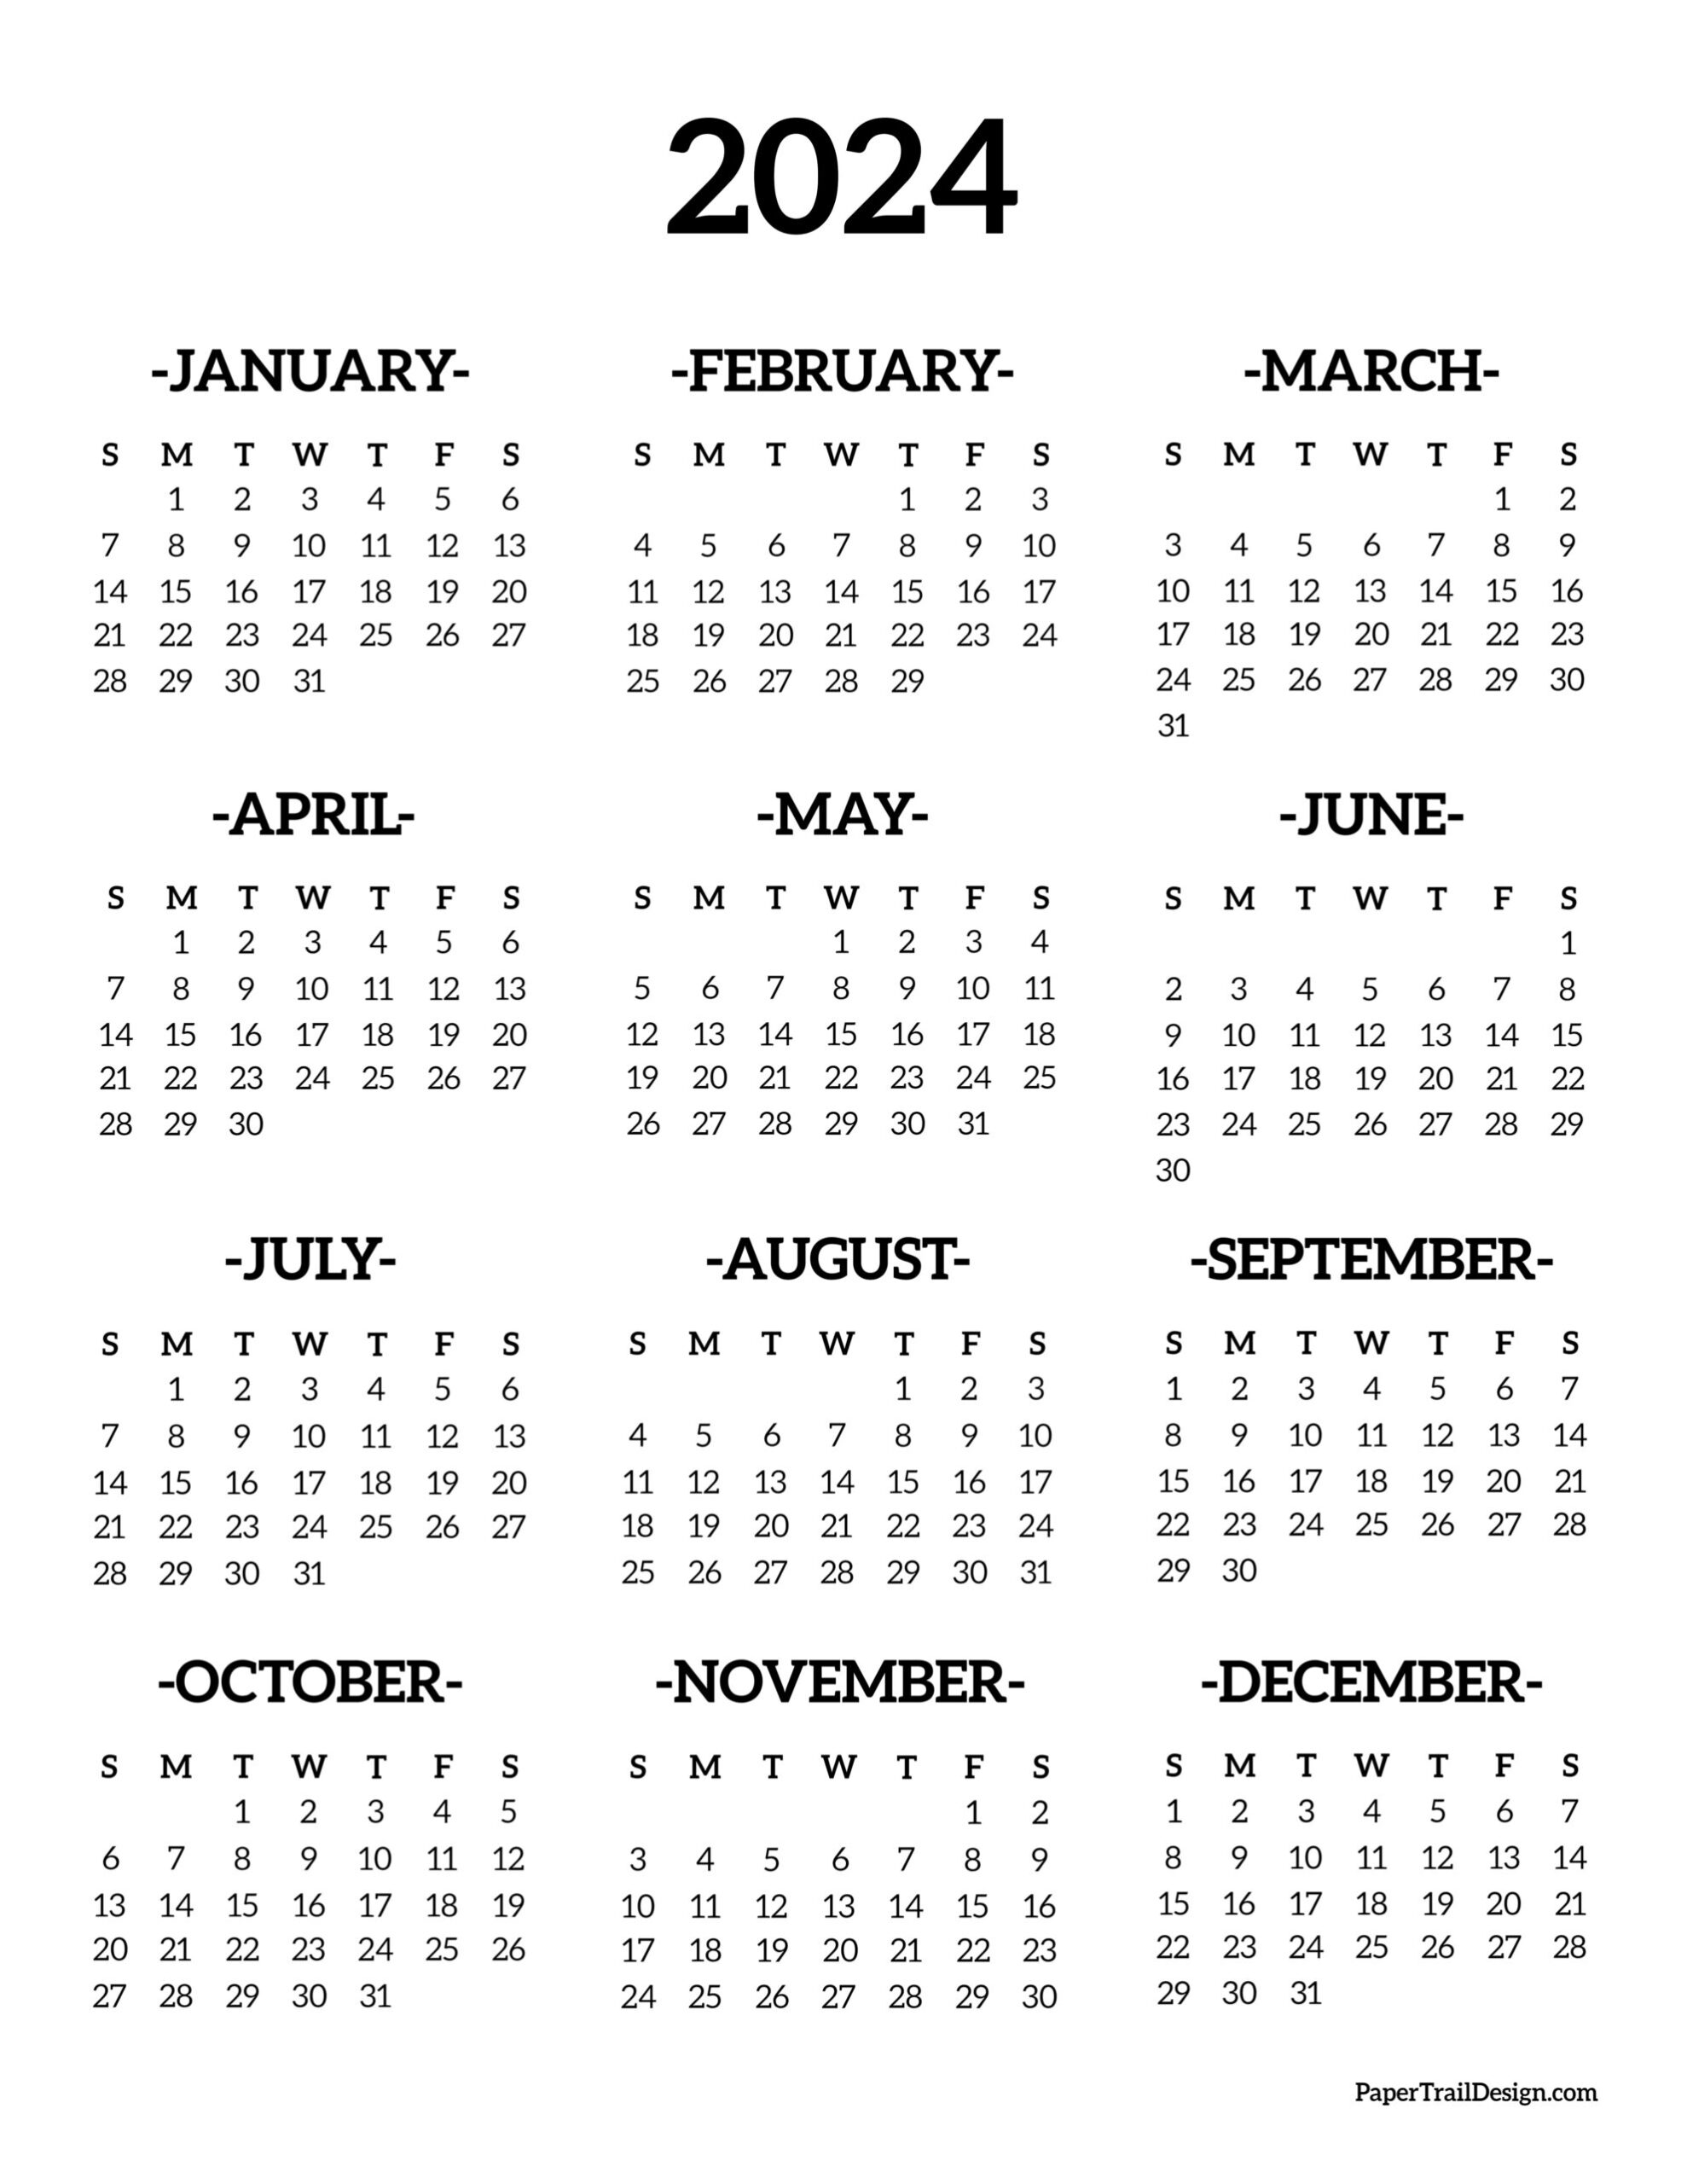 Calendar 2024 Printable One Page - Paper Trail Design for 2024 Calendar Year Free Printable